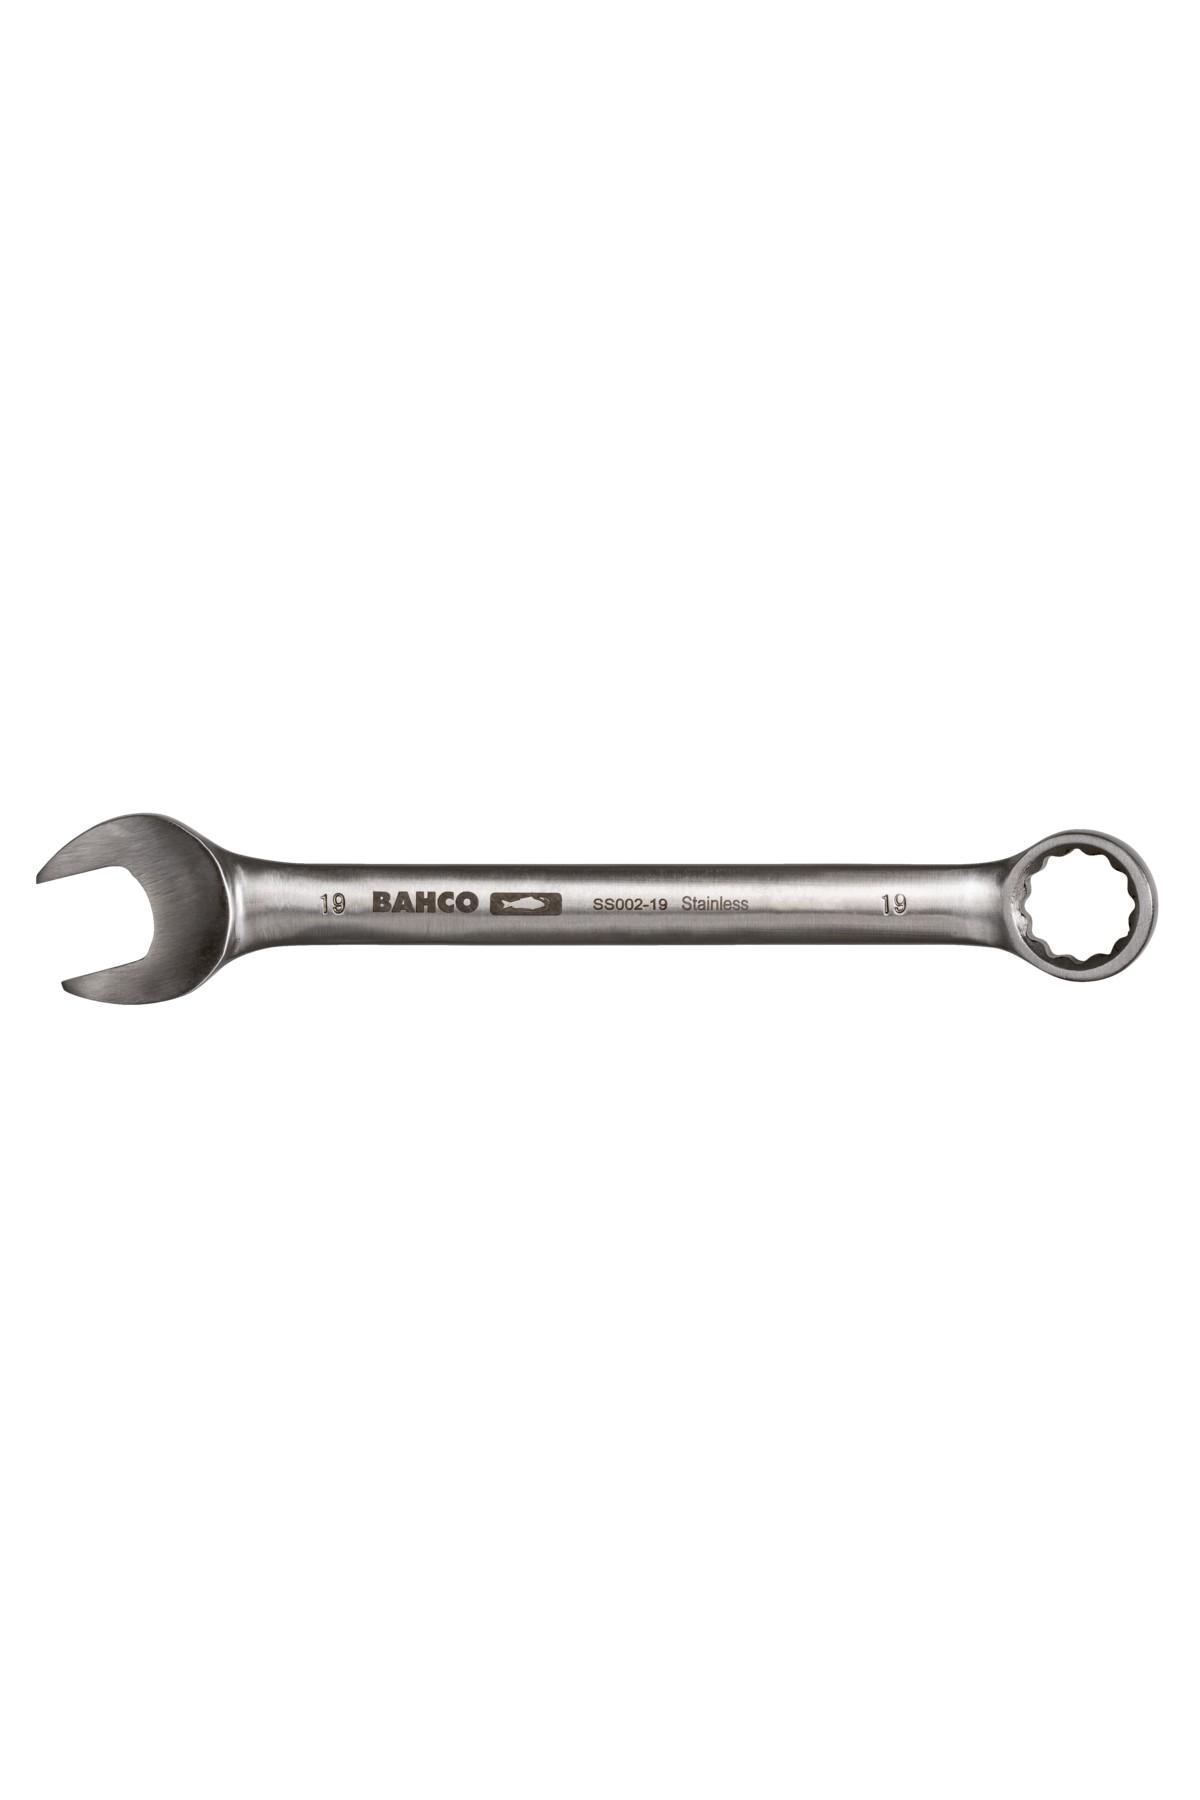 Ring spanner stainless 16mm